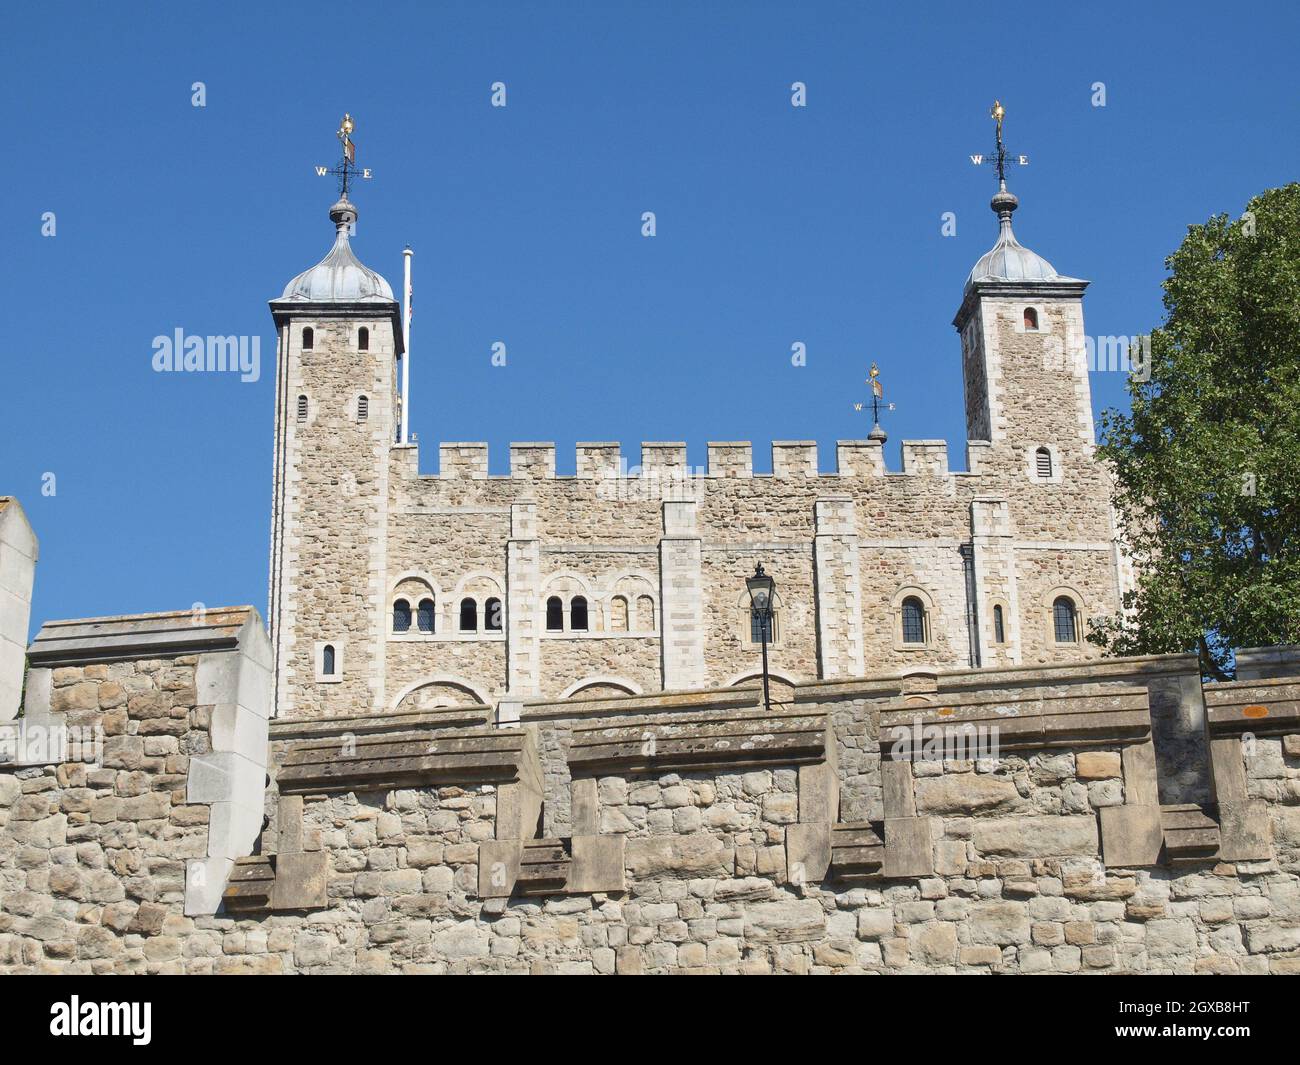 The Tower of London medieval castle and prison. Stock Photo